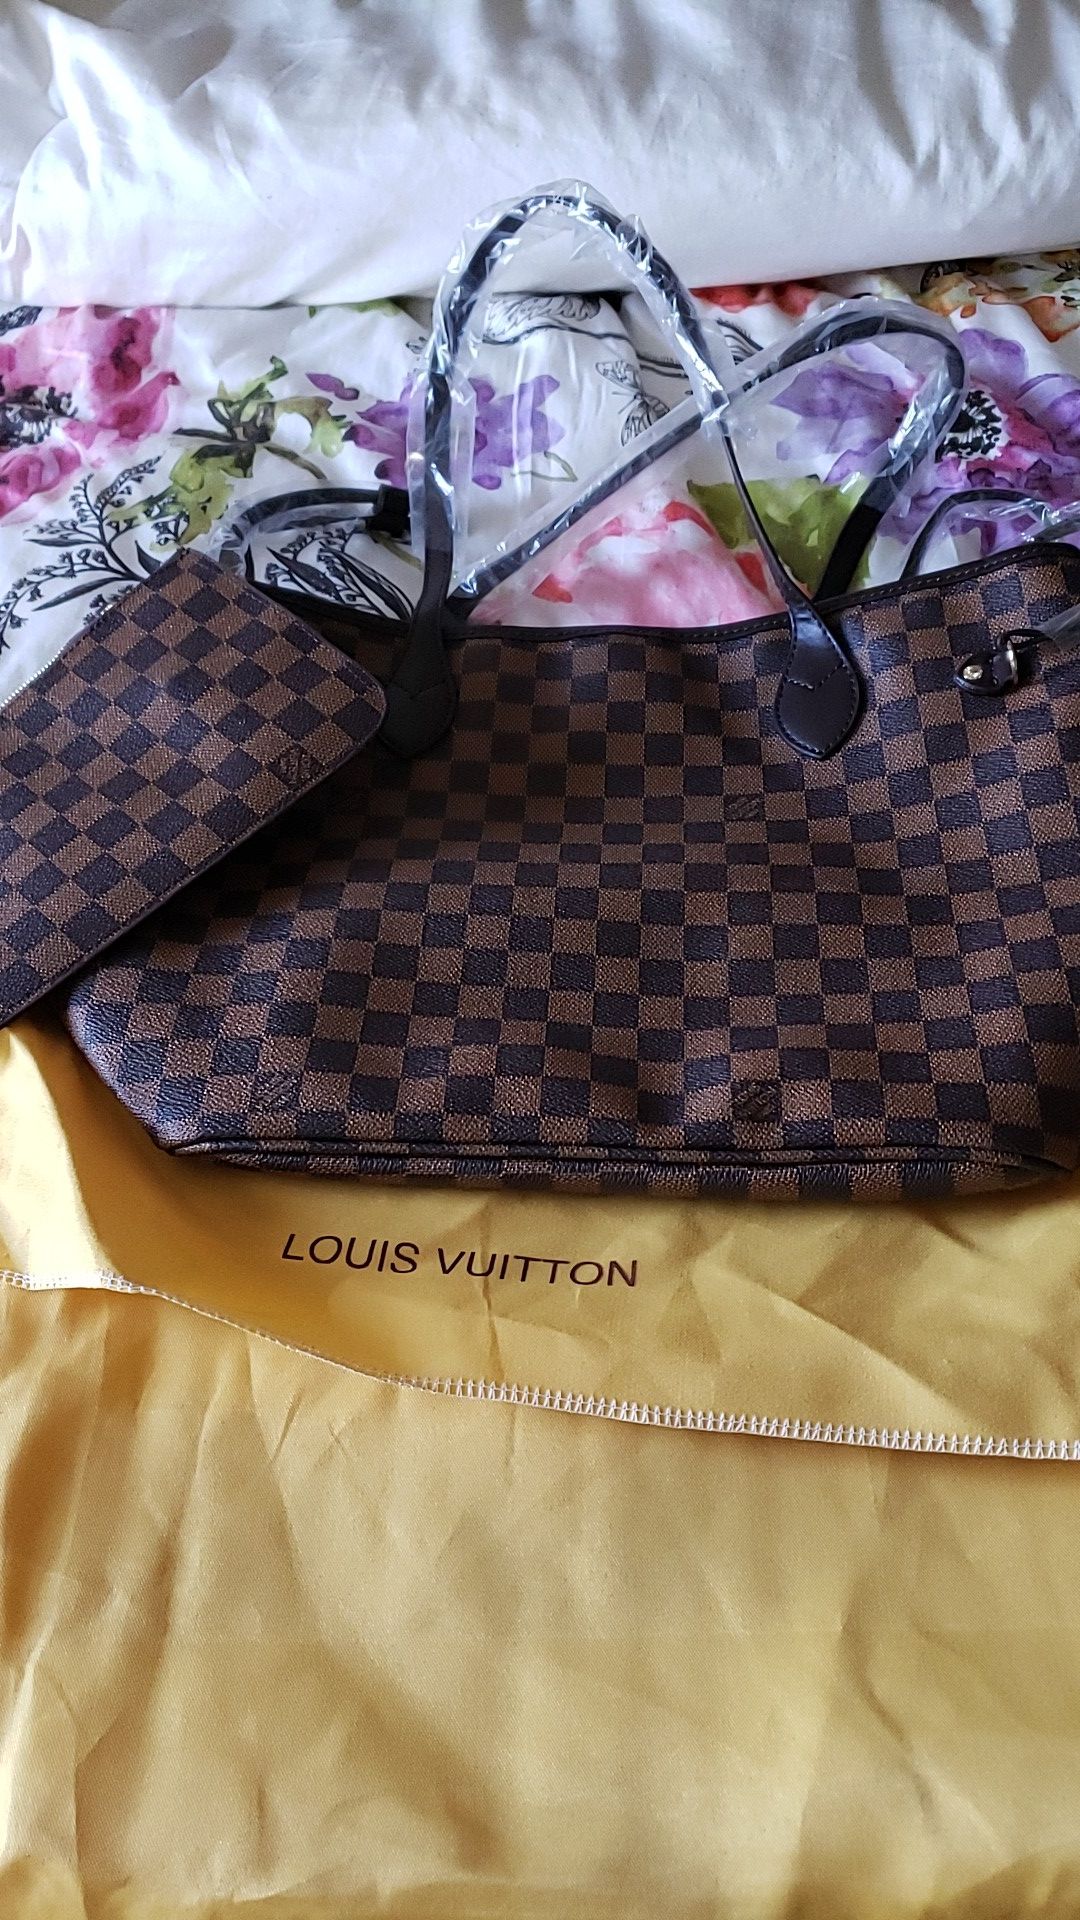 Original Louis Vuitton bag. Check out my other items